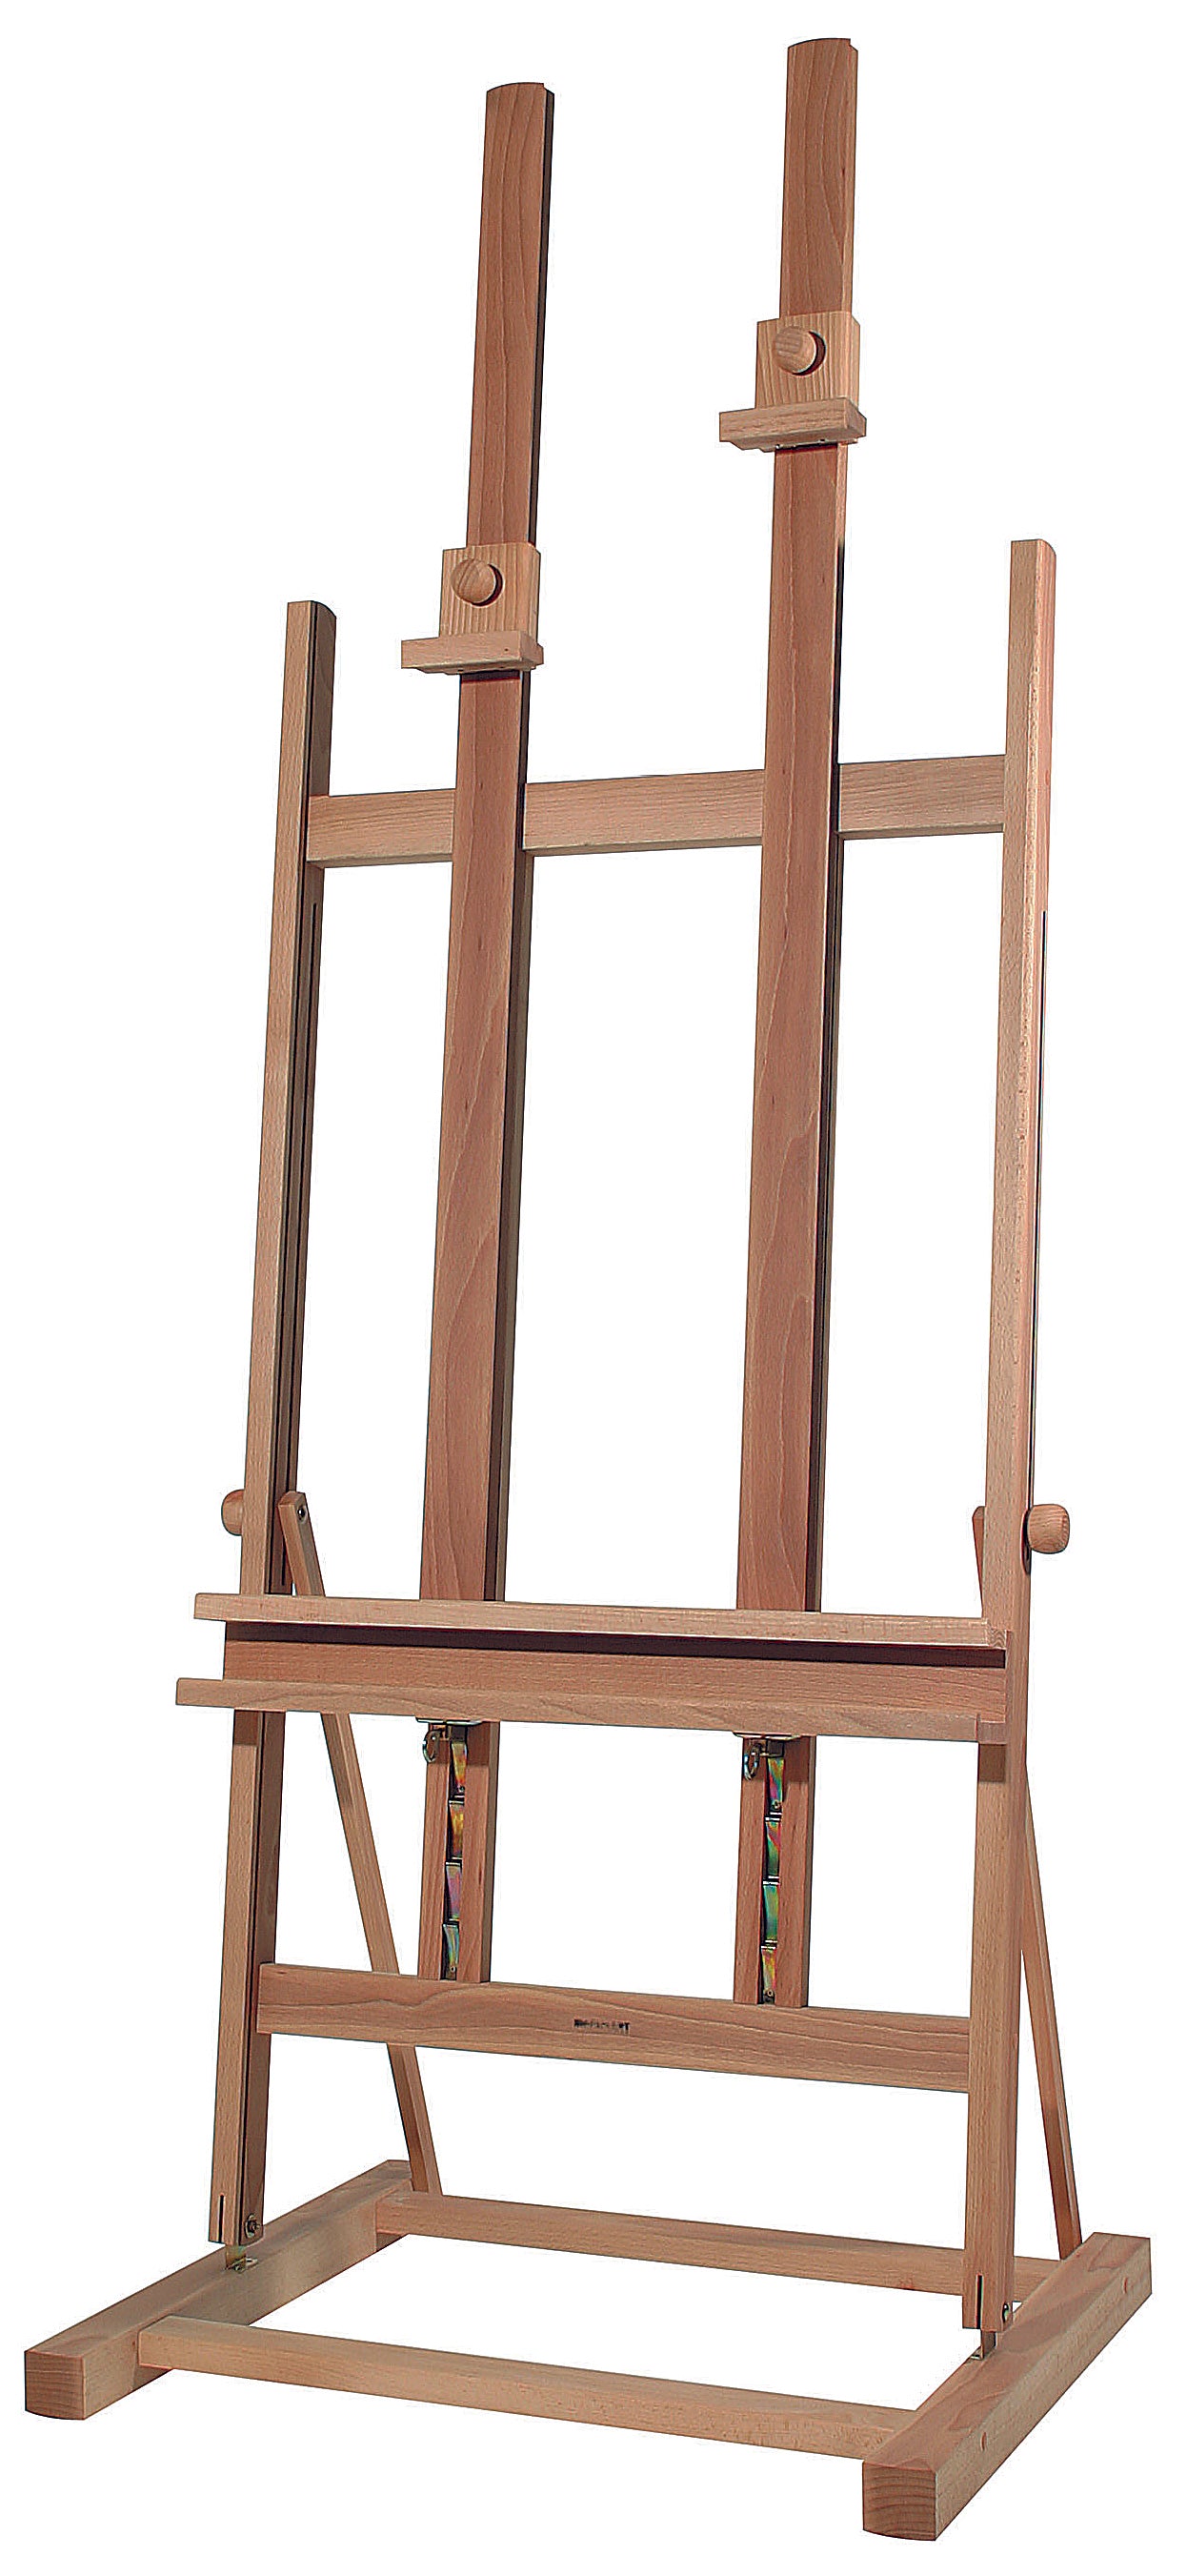 a wooden rocking chair sitting in front of a wooden frame